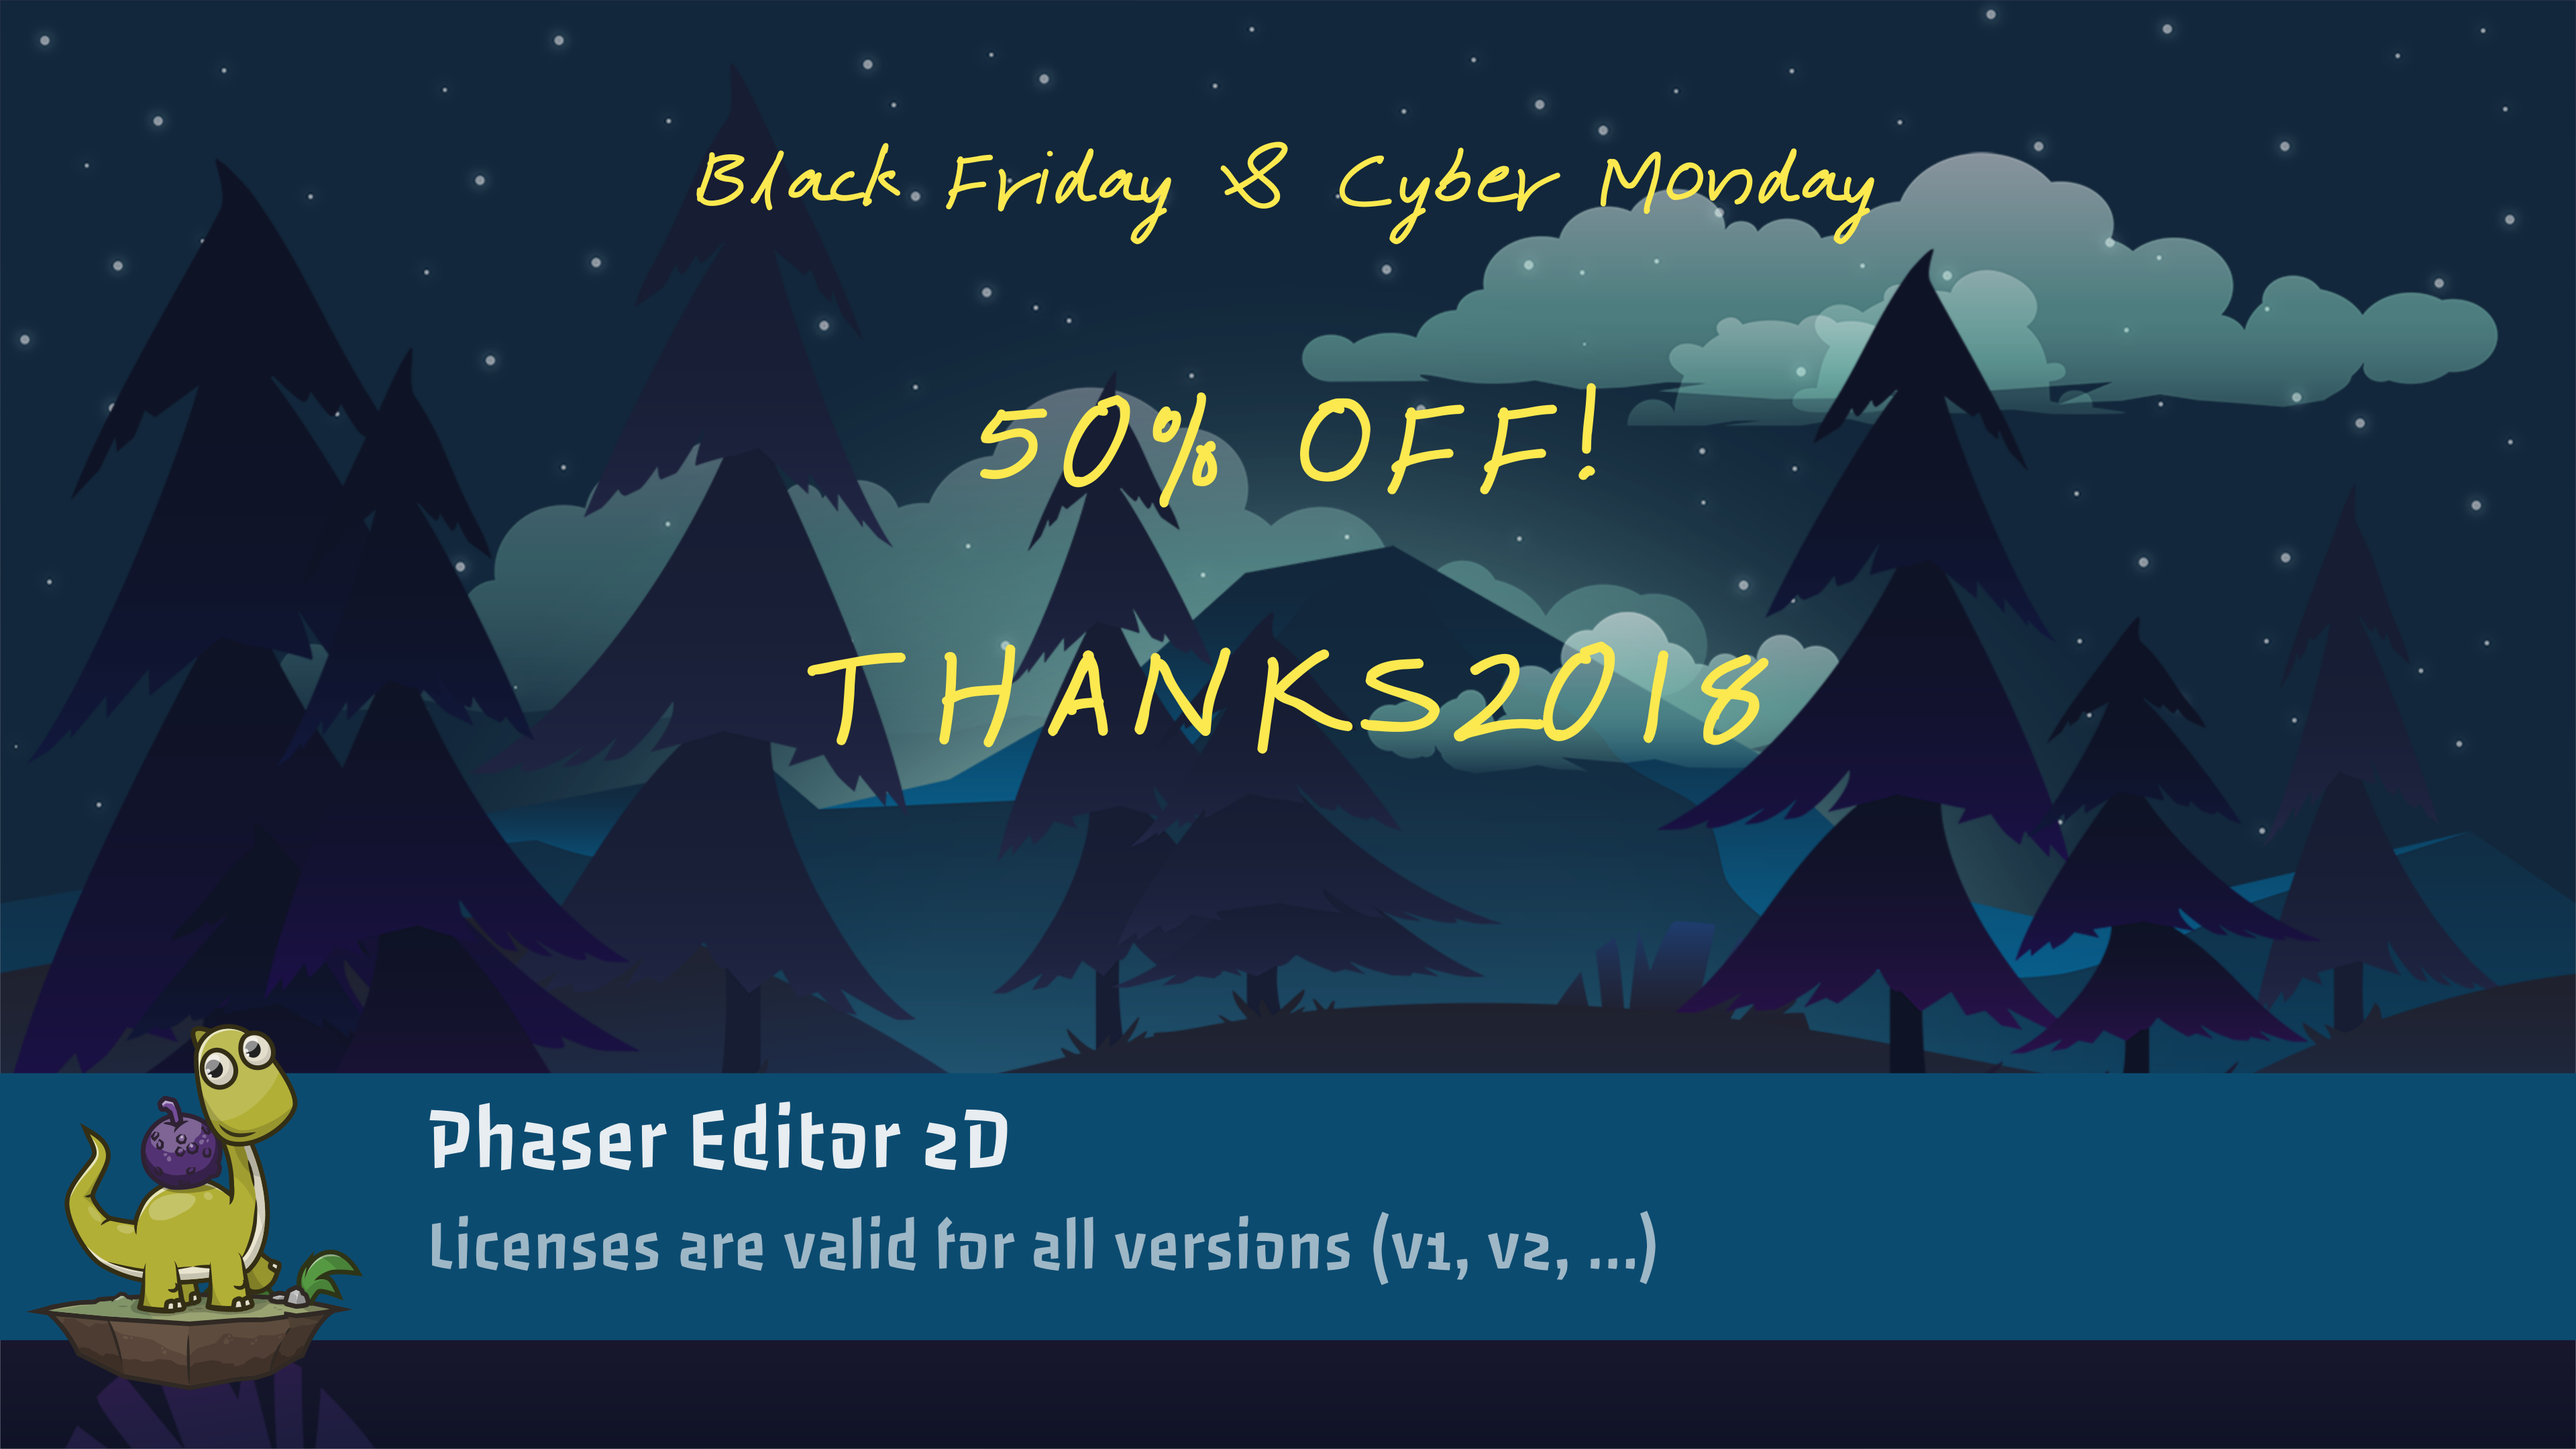 Black Friday to Cyber Monday discount